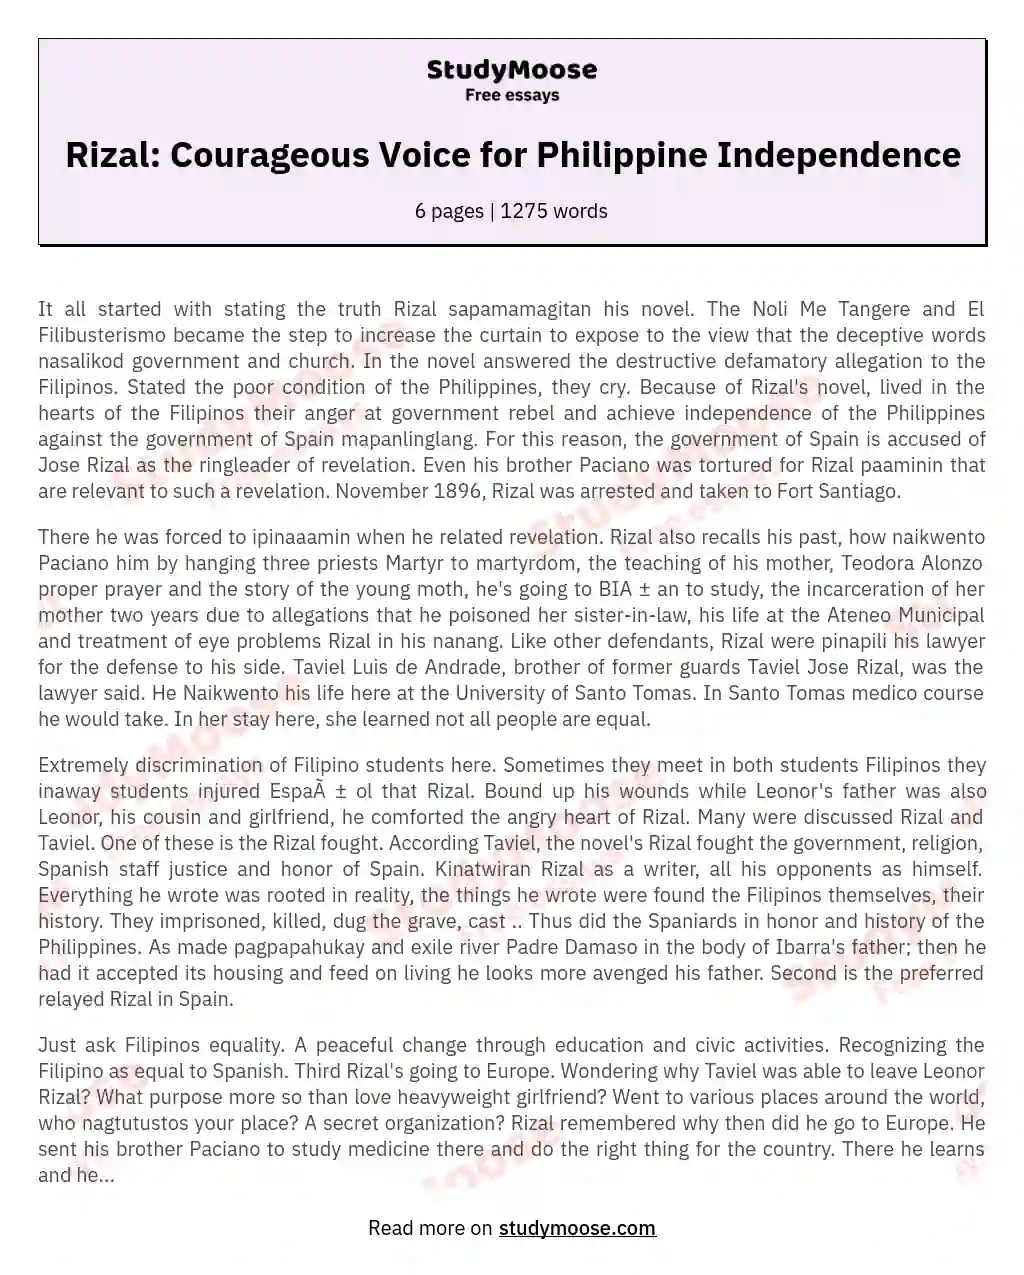 Rizal: Courageous Voice for Philippine Independence essay